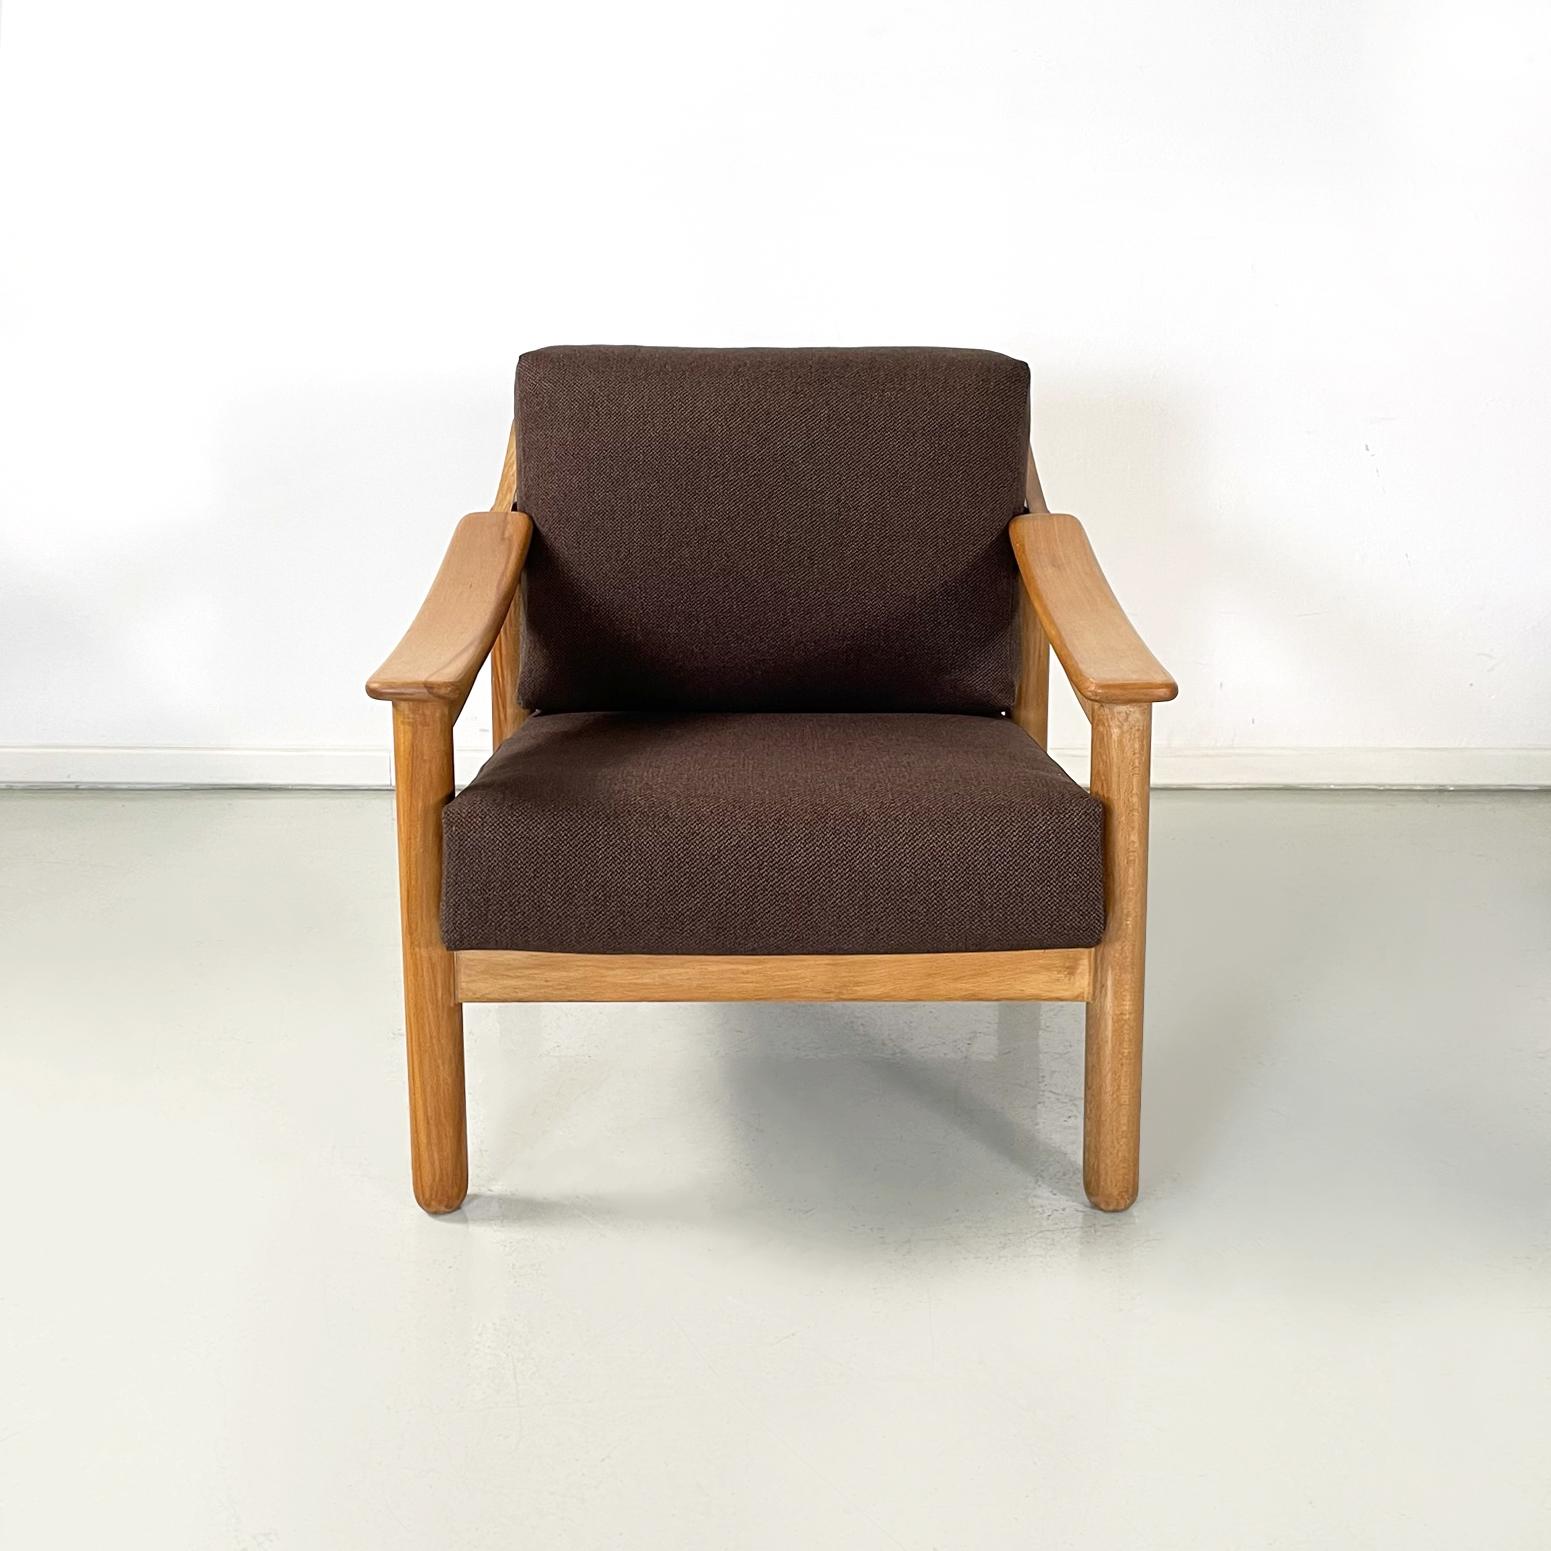 Italian Midcentury Brown Armchairs Sofa Loden by Magistretti for Cassina 1960s 1